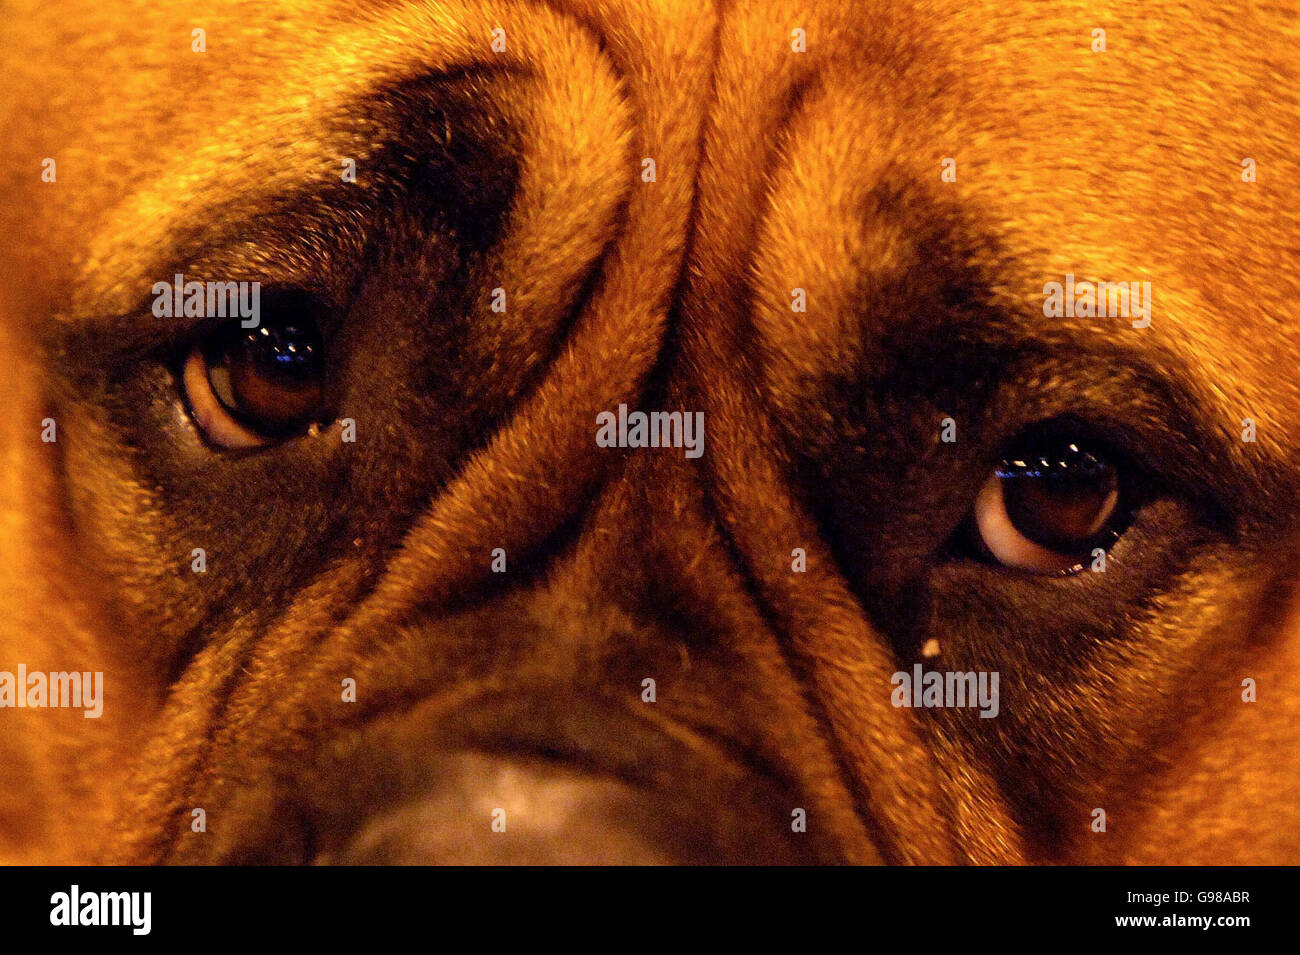 The eyes of a Bullmastiff at the annual dog show Crufts at the National Exhibition Centre, Birmingham. Stock Photo